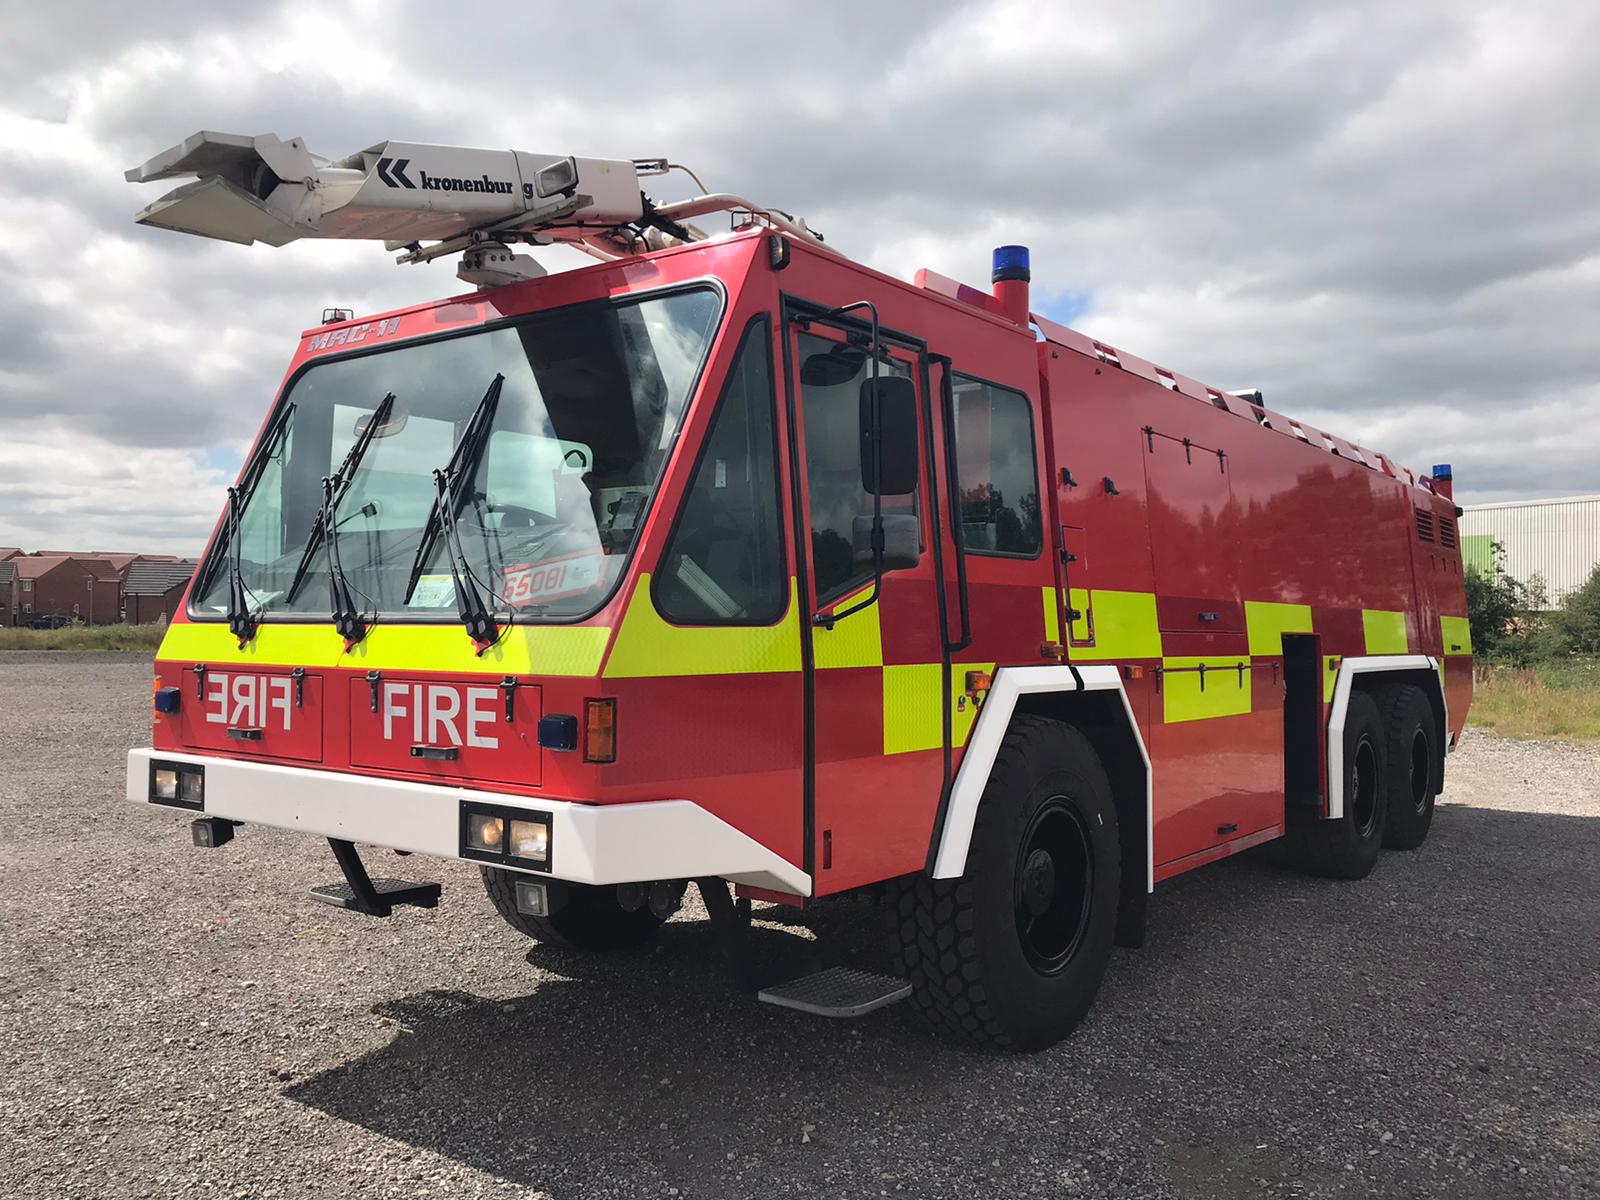 KRONENBURG MAC 11 6X6 Airport Fire Engine - Govsales of mod surplus ex army trucks, ex army land rovers and other military vehicles for sale